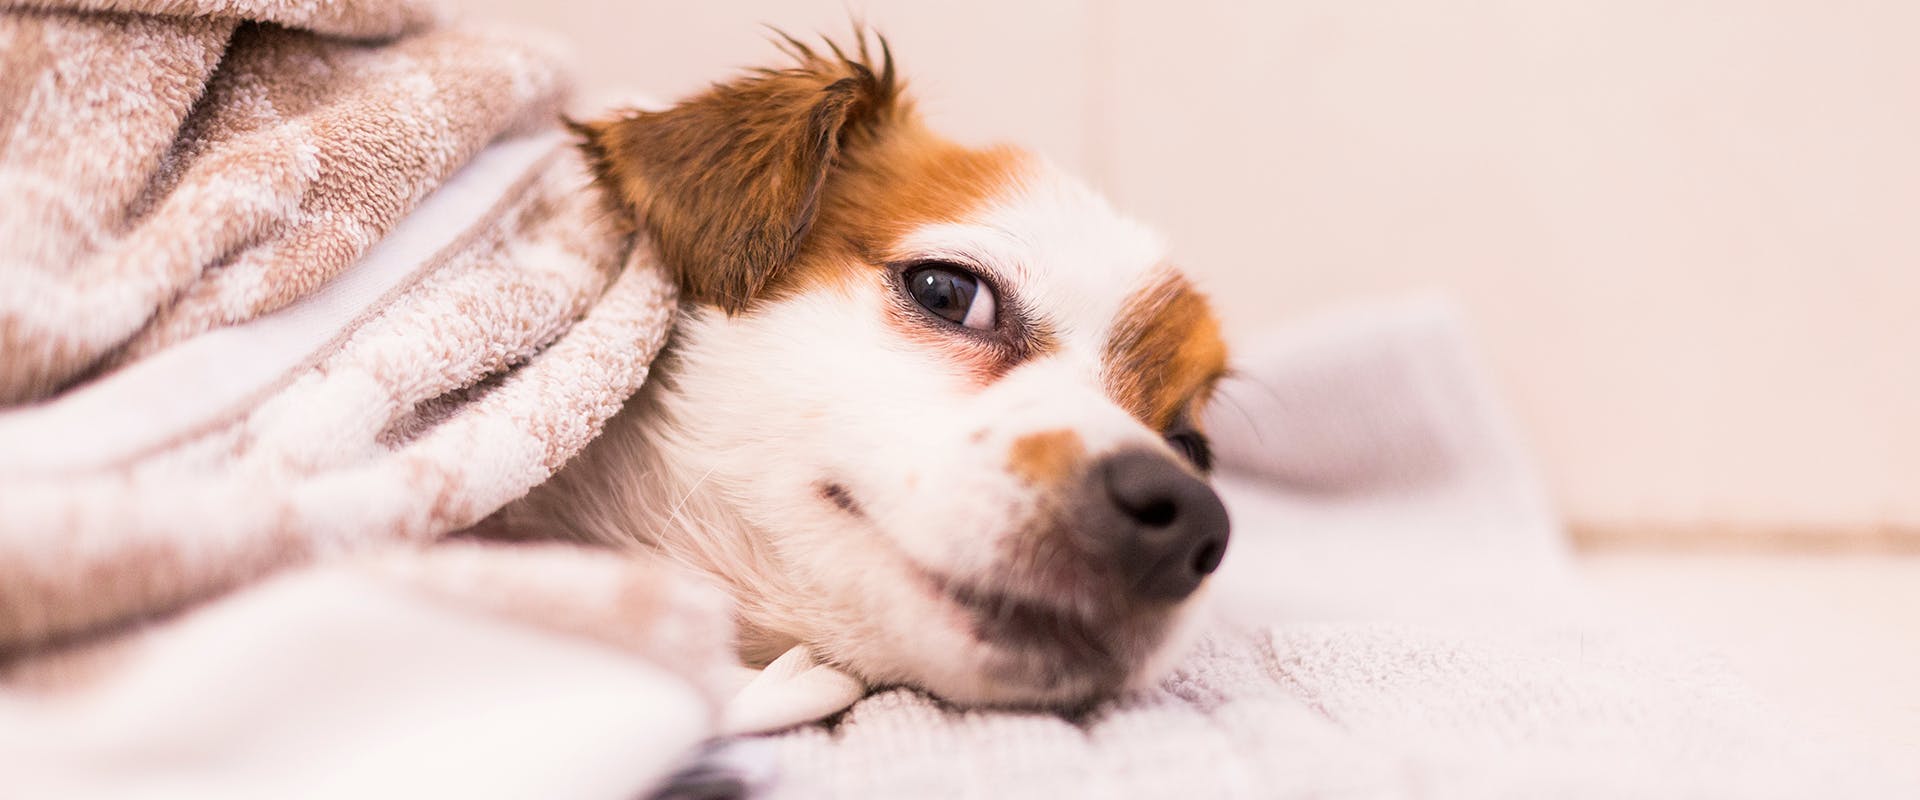 A content, relaxed dog wrapped up in a towel